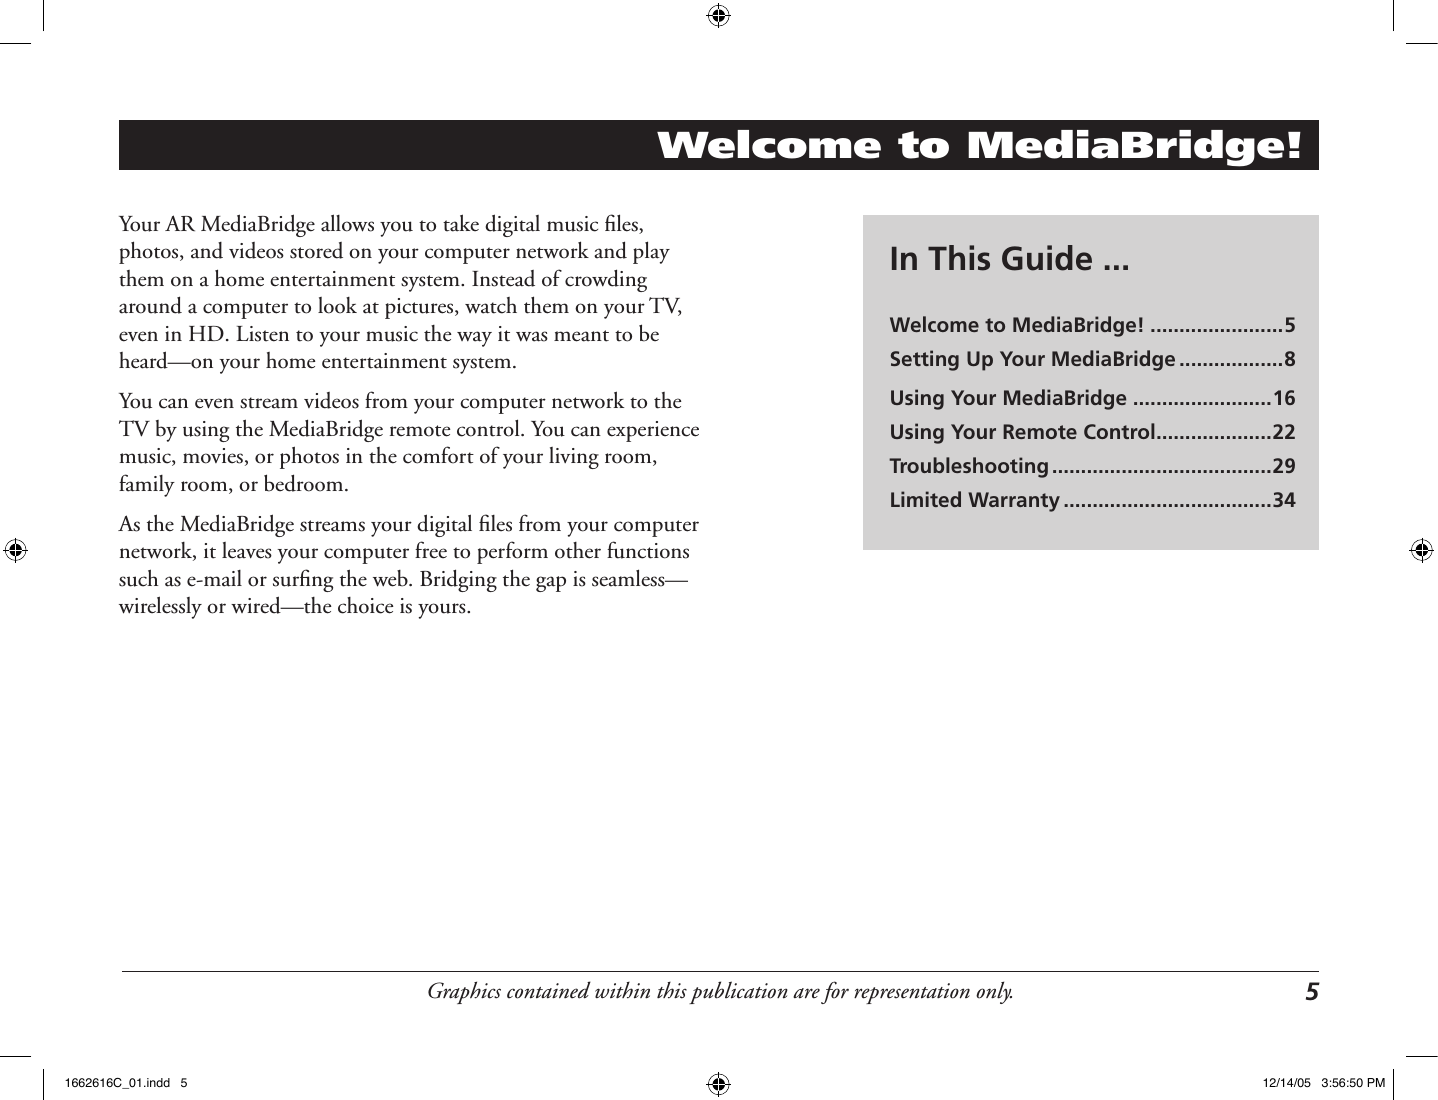 Graphics contained within this publication are for representation only. 5Welcome to MediaBridge!Your AR MediaBridge allows you to take digital music ﬁles, photos, and videos stored on your computer network and play them on a home entertainment system. Instead of crowding around a computer to look at pictures, watch them on your TV, even in HD. Listen to your music the way it was meant to be heard—on your home entertainment system. You can even stream videos from your computer network to the TV by using the MediaBridge remote control. You can experience music, movies, or photos in the comfort of your living room, family room, or bedroom. As the MediaBridge streams your digital ﬁles from your computer network, it leaves your computer free to perform other functions such as e-mail or surﬁng the web. Bridging the gap is seamless—wirelessly or wired—the choice is yours.In This Guide ...Welcome to MediaBridge! .......................5Setting Up Your MediaBridge ..................8Using Your MediaBridge ........................16Using Your Remote Control ....................22Troubleshooting ......................................29Limited Warranty ....................................341662616C_01.indd   5 12/14/05   3:56:50 PM